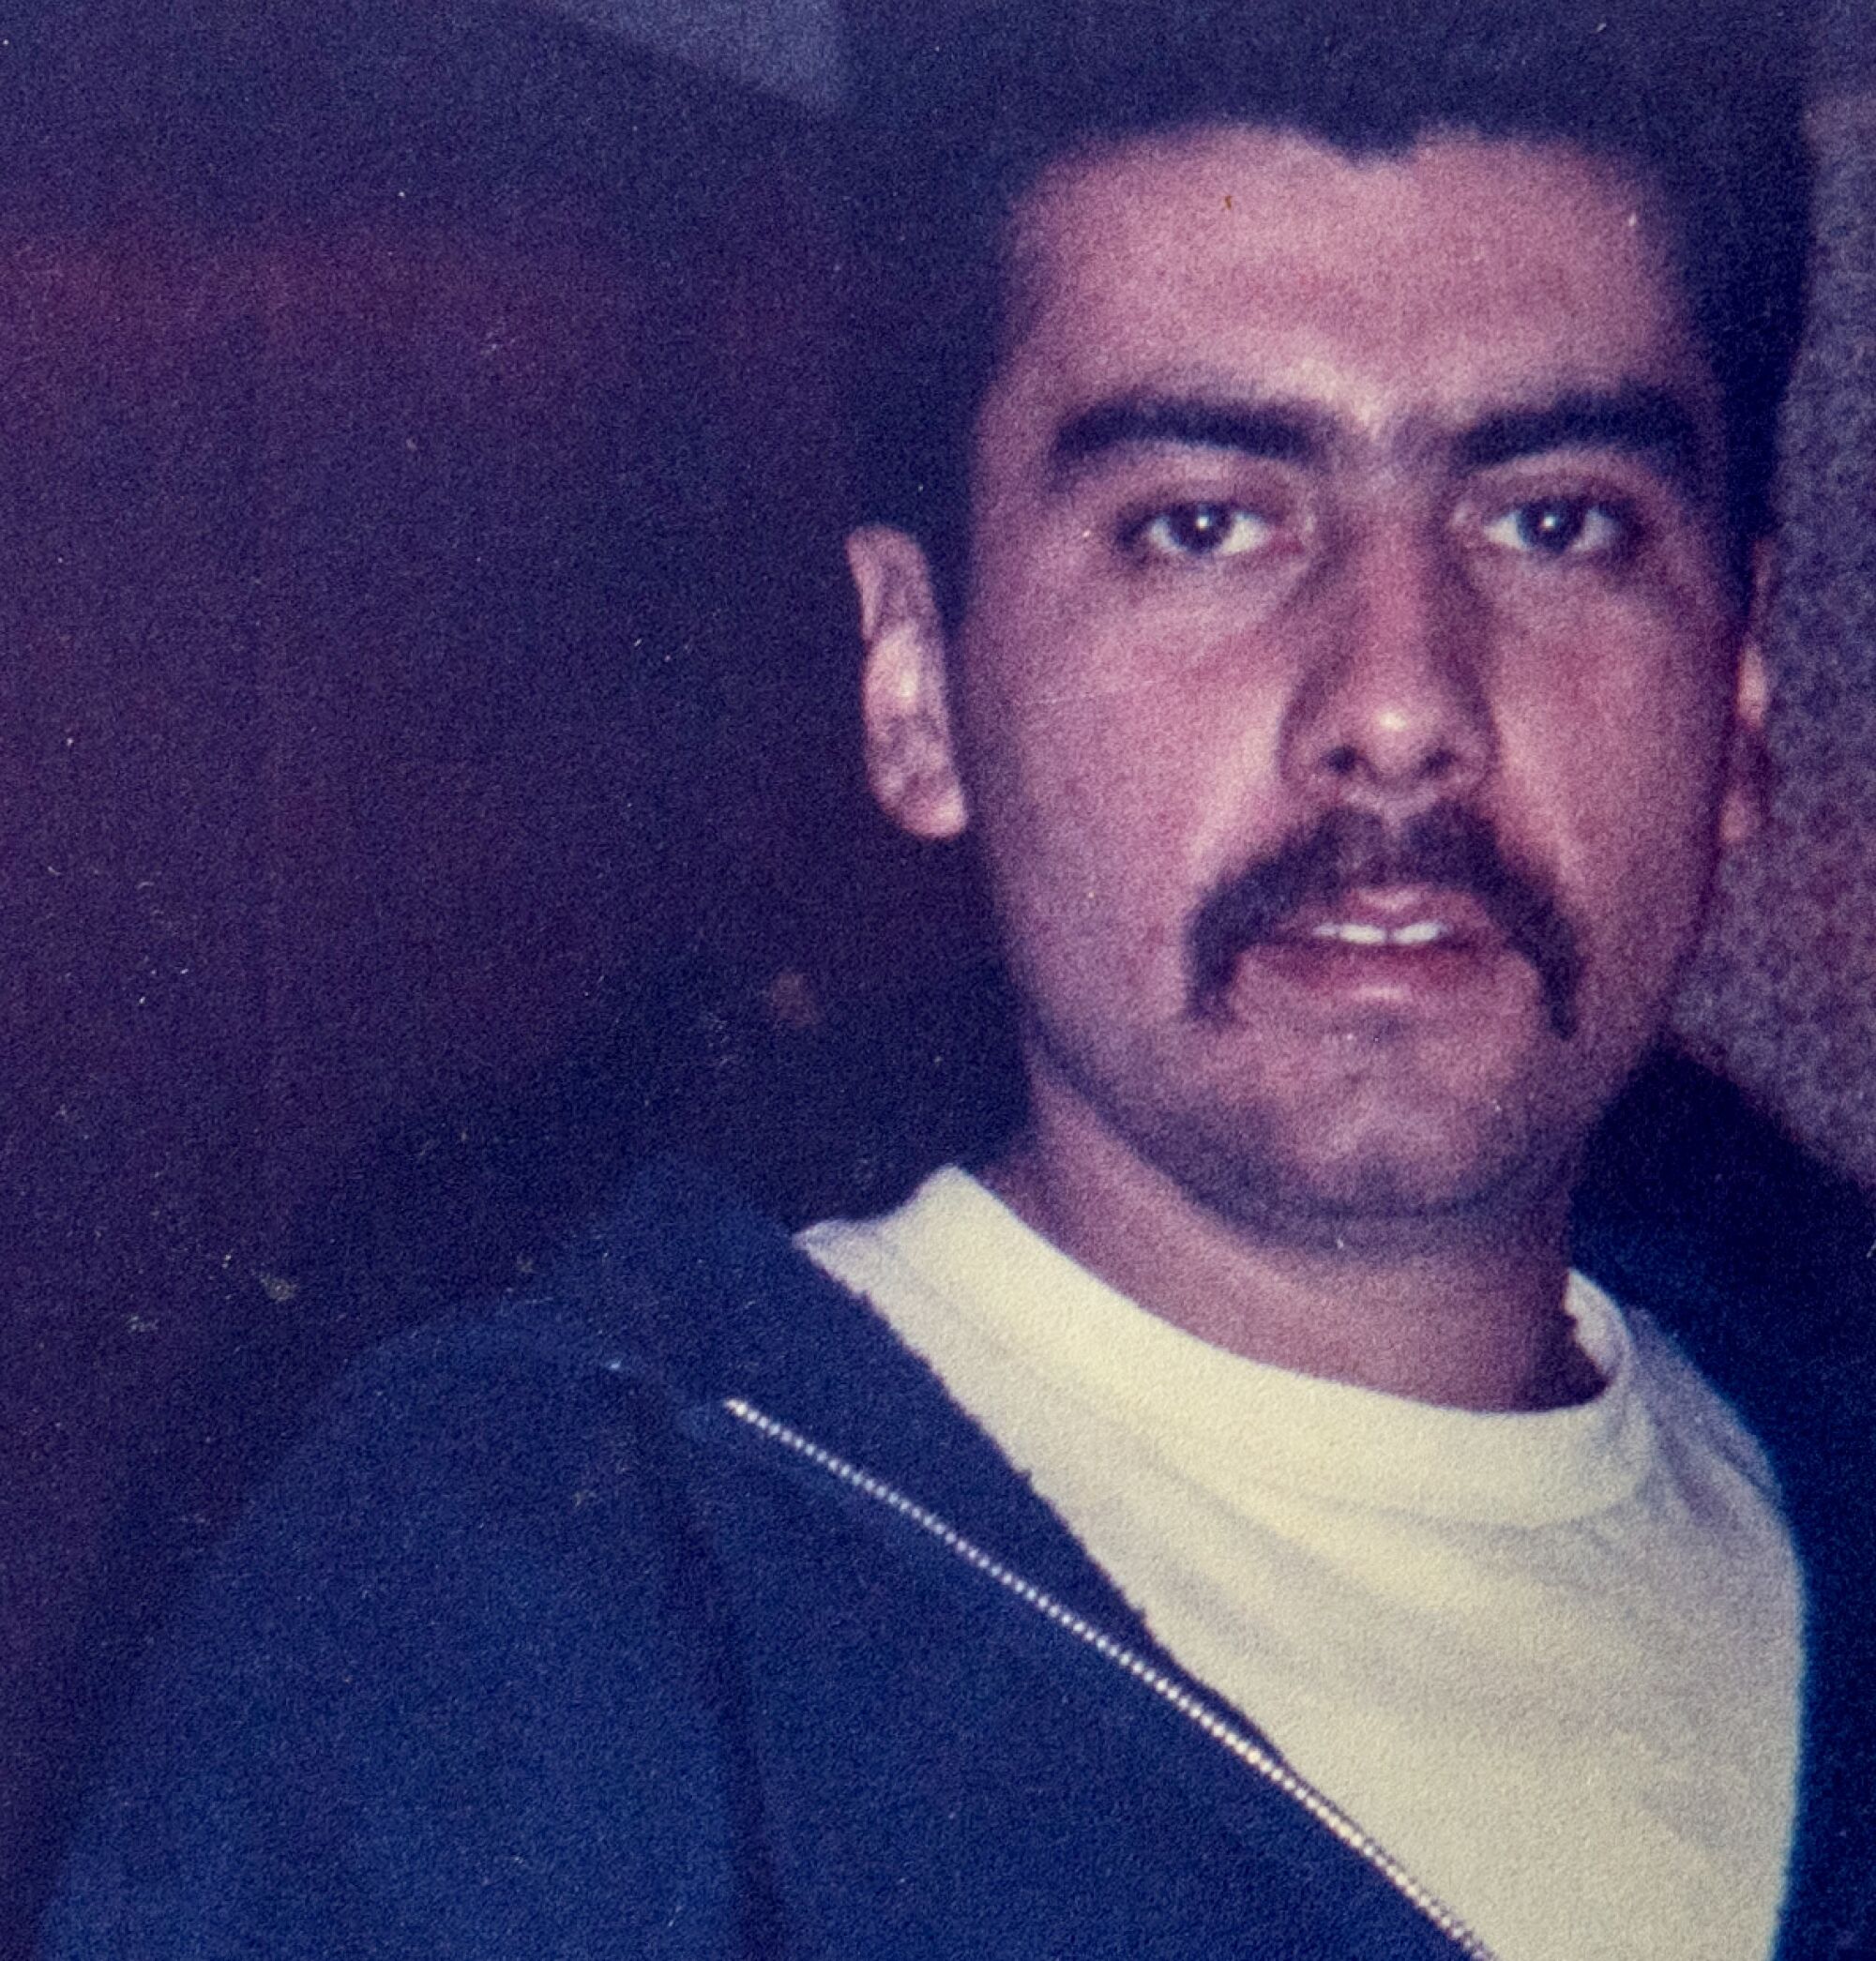 Photo of Julio Jimenez, who was brutally murdered in Los Angeles in 1986. 